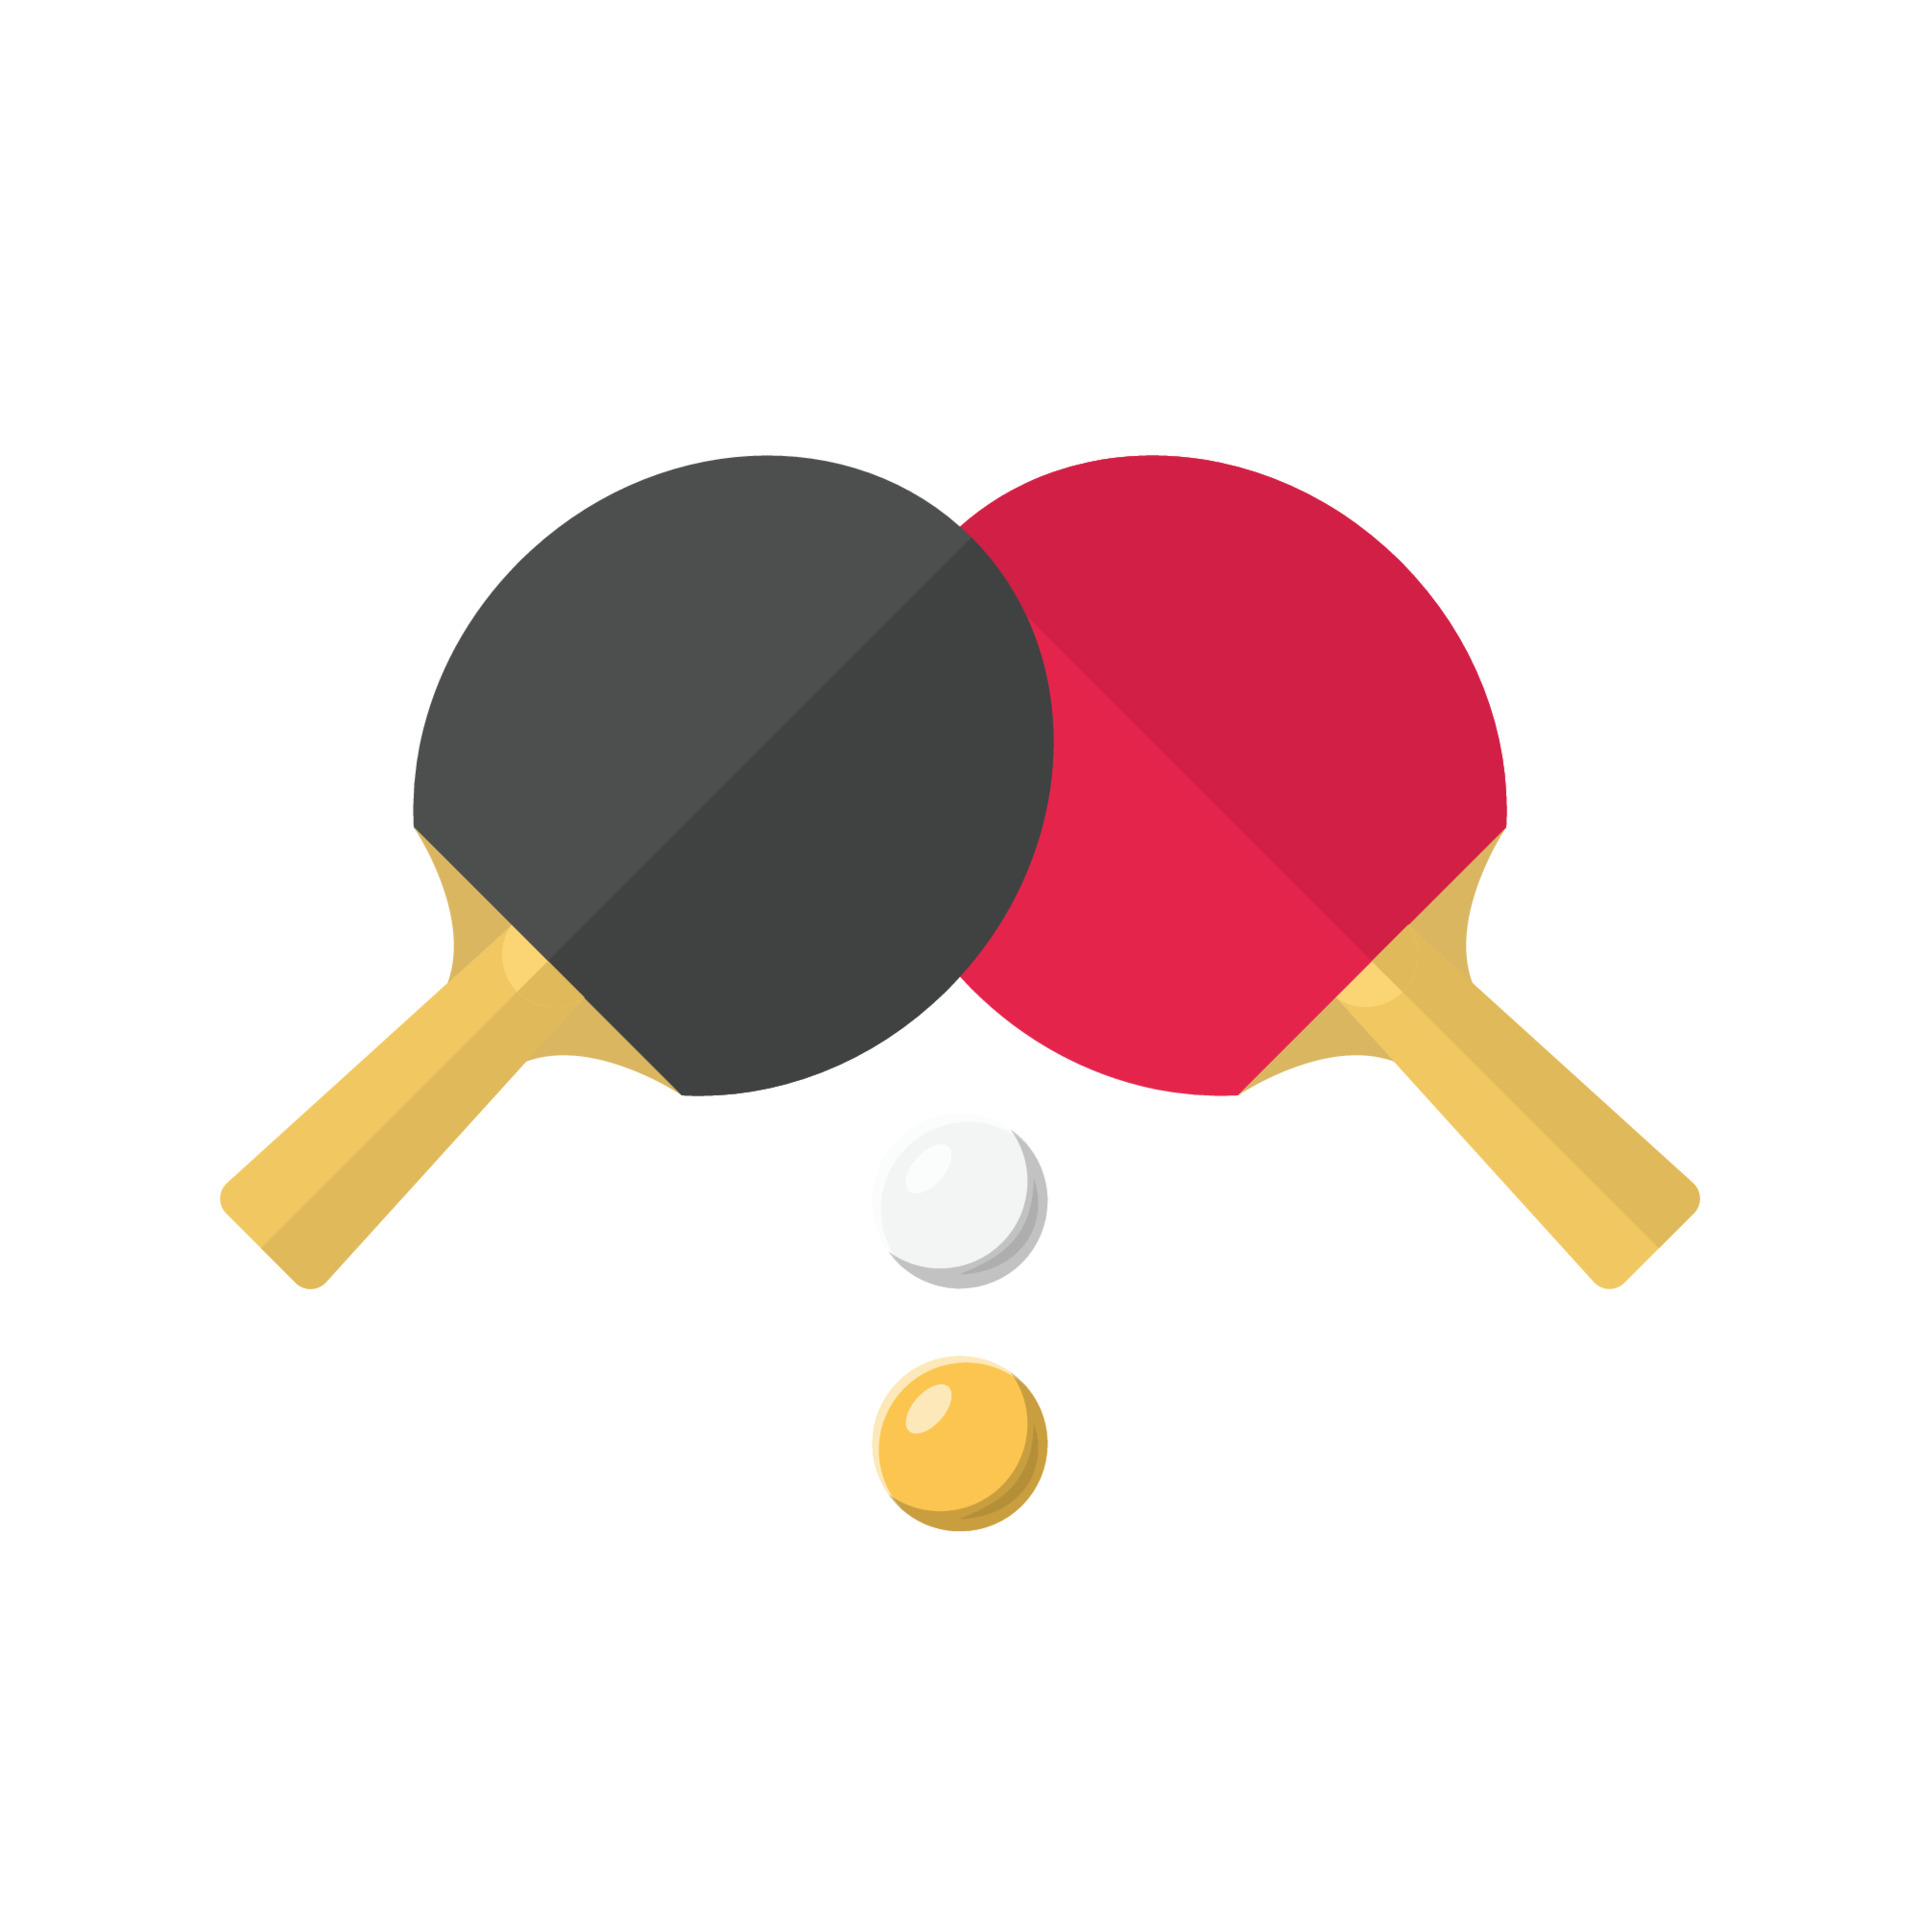 vecteezy_table-tennis-and-ping-pong-flat-illustration-black-and-red_5748748.jpg